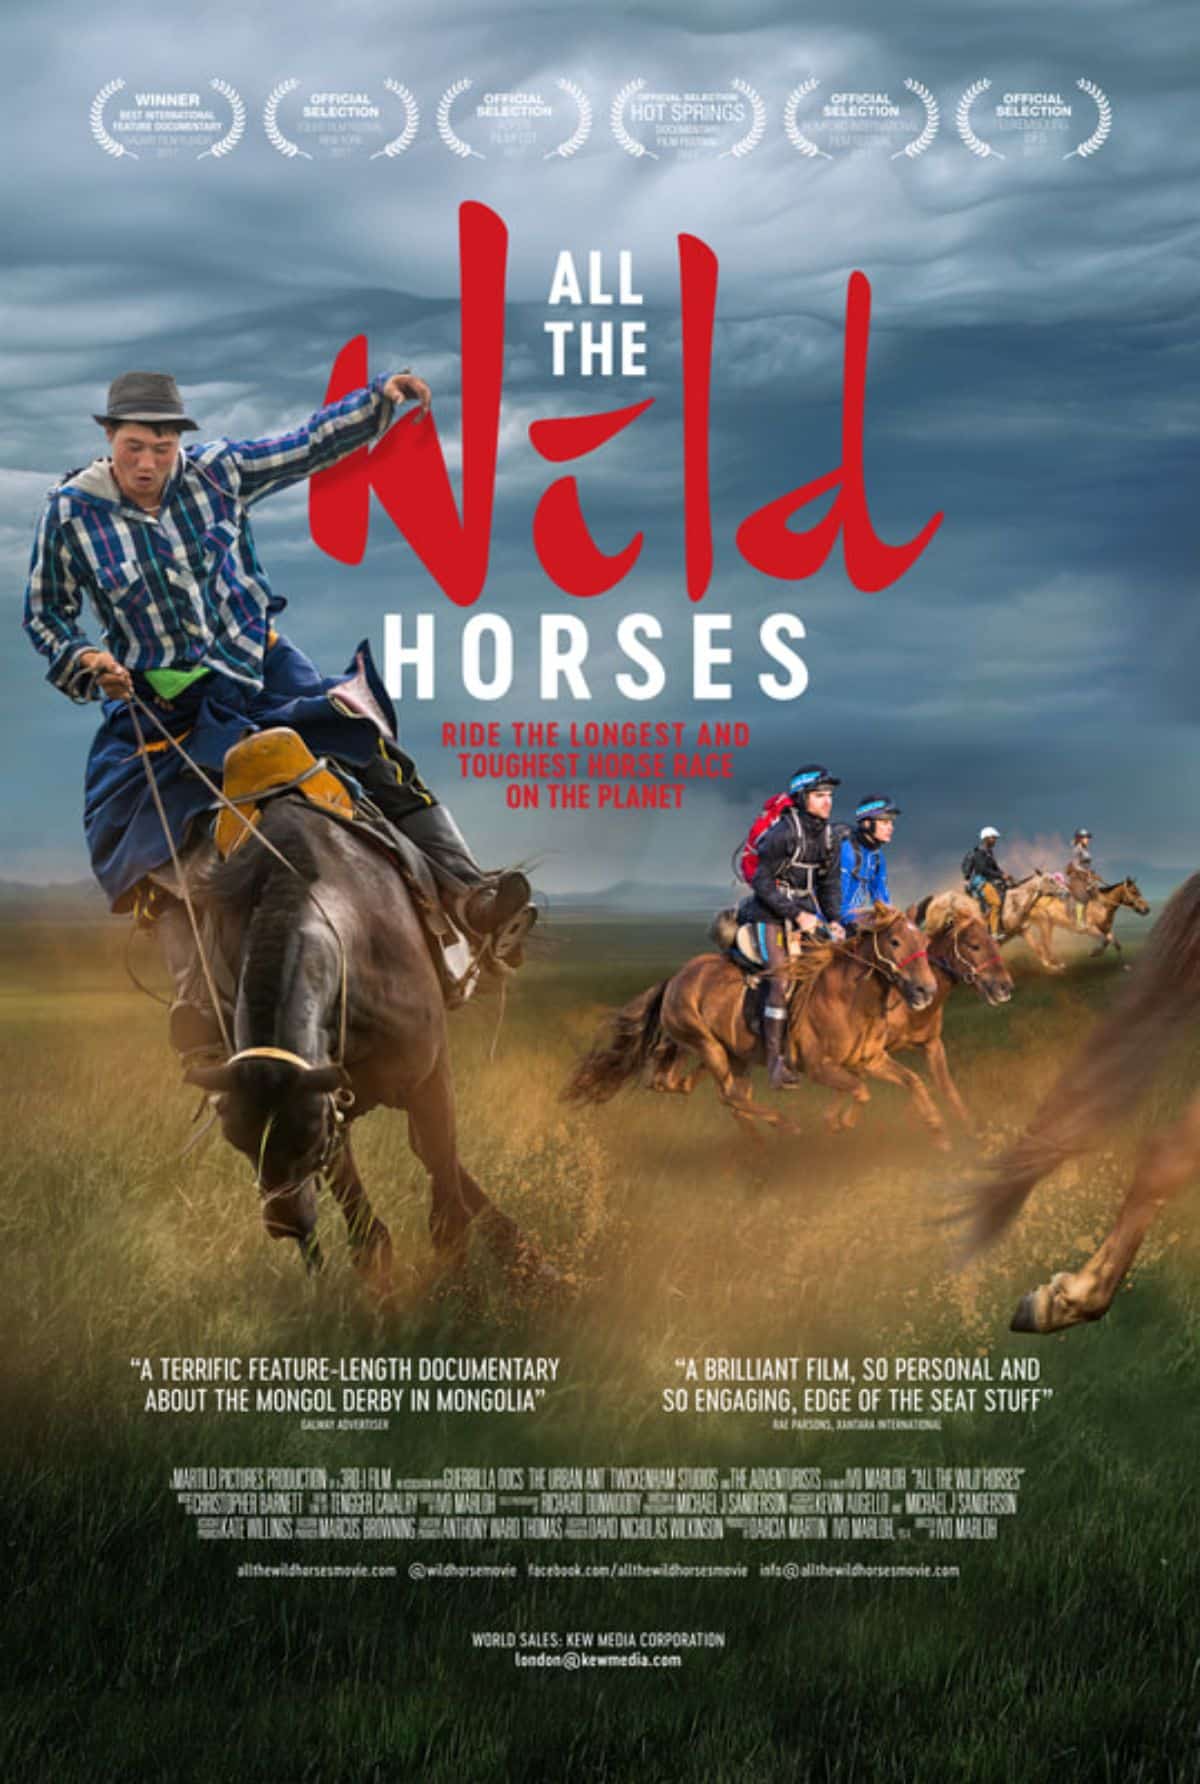 All the Wild Horses poster.